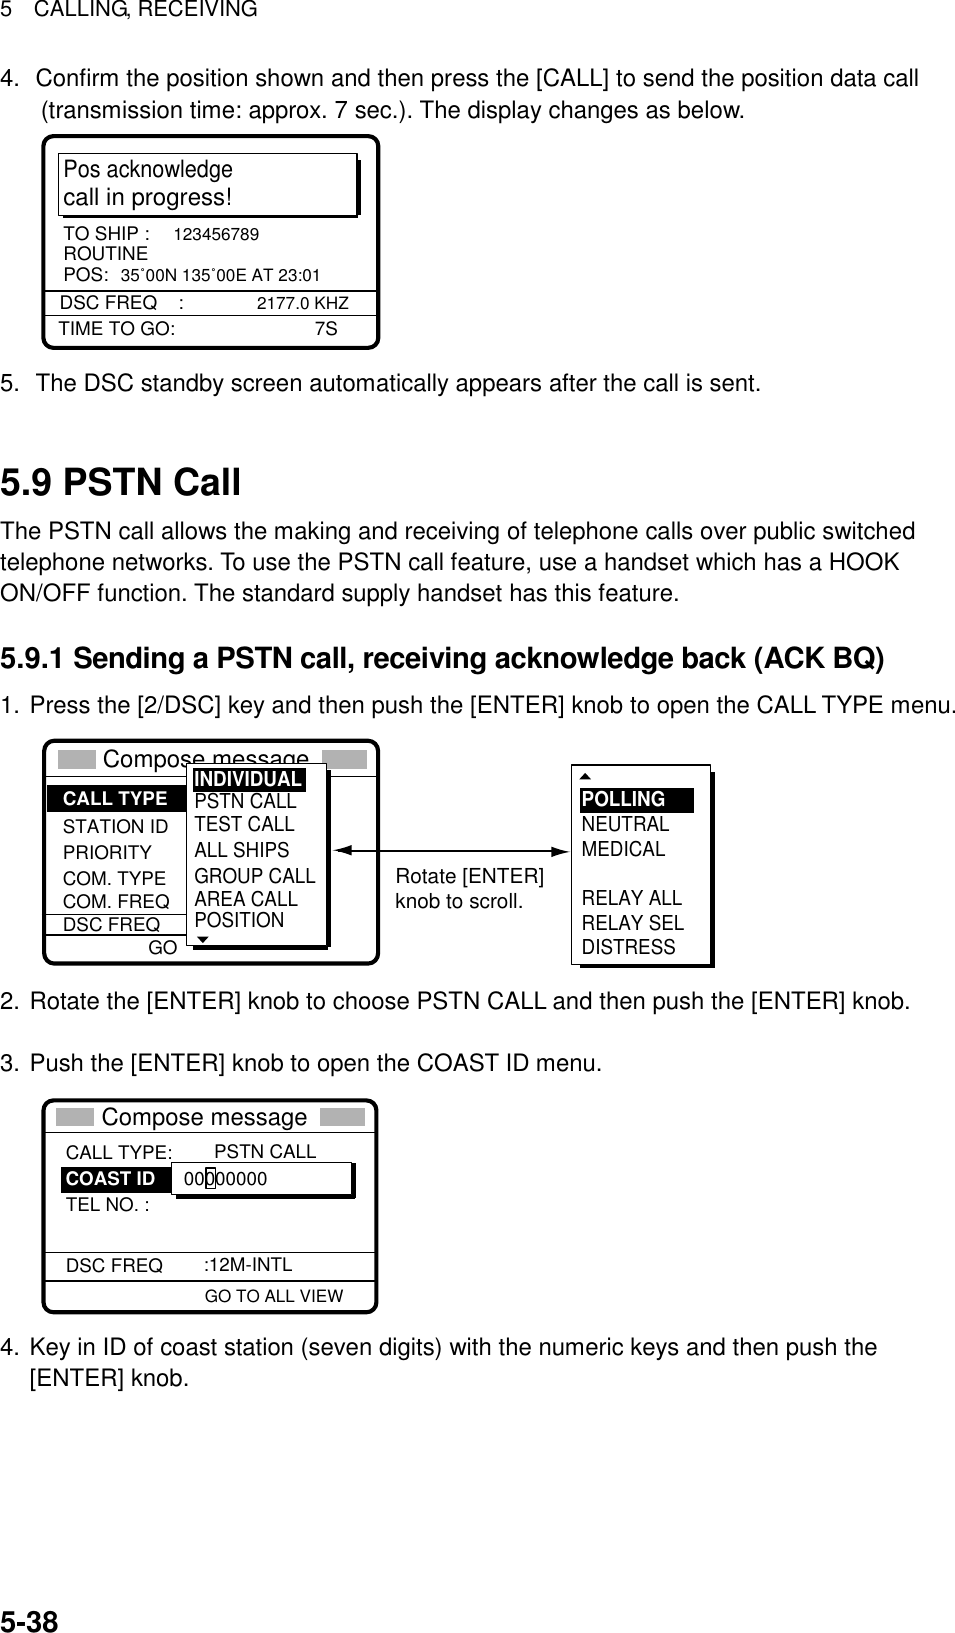 5  CALLING, RECEIVING  5-384.  Confirm the position shown and then press the [CALL] to send the position data call (transmission time: approx. 7 sec.). The display changes as below. Pos acknowledgecall in progress!TIME TO GO:          7SDSC FREQ    :  2177.0 KHZTO SHIP :  123456789POS:  35˚00N 135˚00E AT 23:01ROUTINE 5.  The DSC standby screen automatically appears after the call is sent.   5.9 PSTN Call The PSTN call allows the making and receiving of telephone calls over public switched telephone networks. To use the PSTN call feature, use a handset which has a HOOK ON/OFF function. The standard supply handset has this feature. 5.9.1 Sending a PSTN call, receiving acknowledge back (ACK BQ) 1. Press the [2/DSC] key and then push the [ENTER] knob to open the CALL TYPE menu. ** Compose message  ** STATION IDPRIORITYCOM. TYPECOM. FREQDSC FREQ: All ships: Safety : Telephone :  2187.5 kHzCALL TYPE PSTN CALLTEST CALLALL SHIPSGROUP CALLAREA CALLPOSITION INDIVIDUAL   POLLINGNEUTRALMEDICALRELAY ALLRELAY SELDISTRESSRotate [ENTER]knob to scroll.GO 2. Rotate the [ENTER] knob to choose PSTN CALL and then push the [ENTER] knob.    3. Push the [ENTER] knob to open the COAST ID menu.  GO TO ALL VIEWCALL TYPE:TEL NO. : DSC FREQ   PSTN CALL :12M-INTL 00000000COAST ID** Compose message  ** 4. Key in ID of coast station (seven digits) with the numeric keys and then push the [ENTER] knob. 